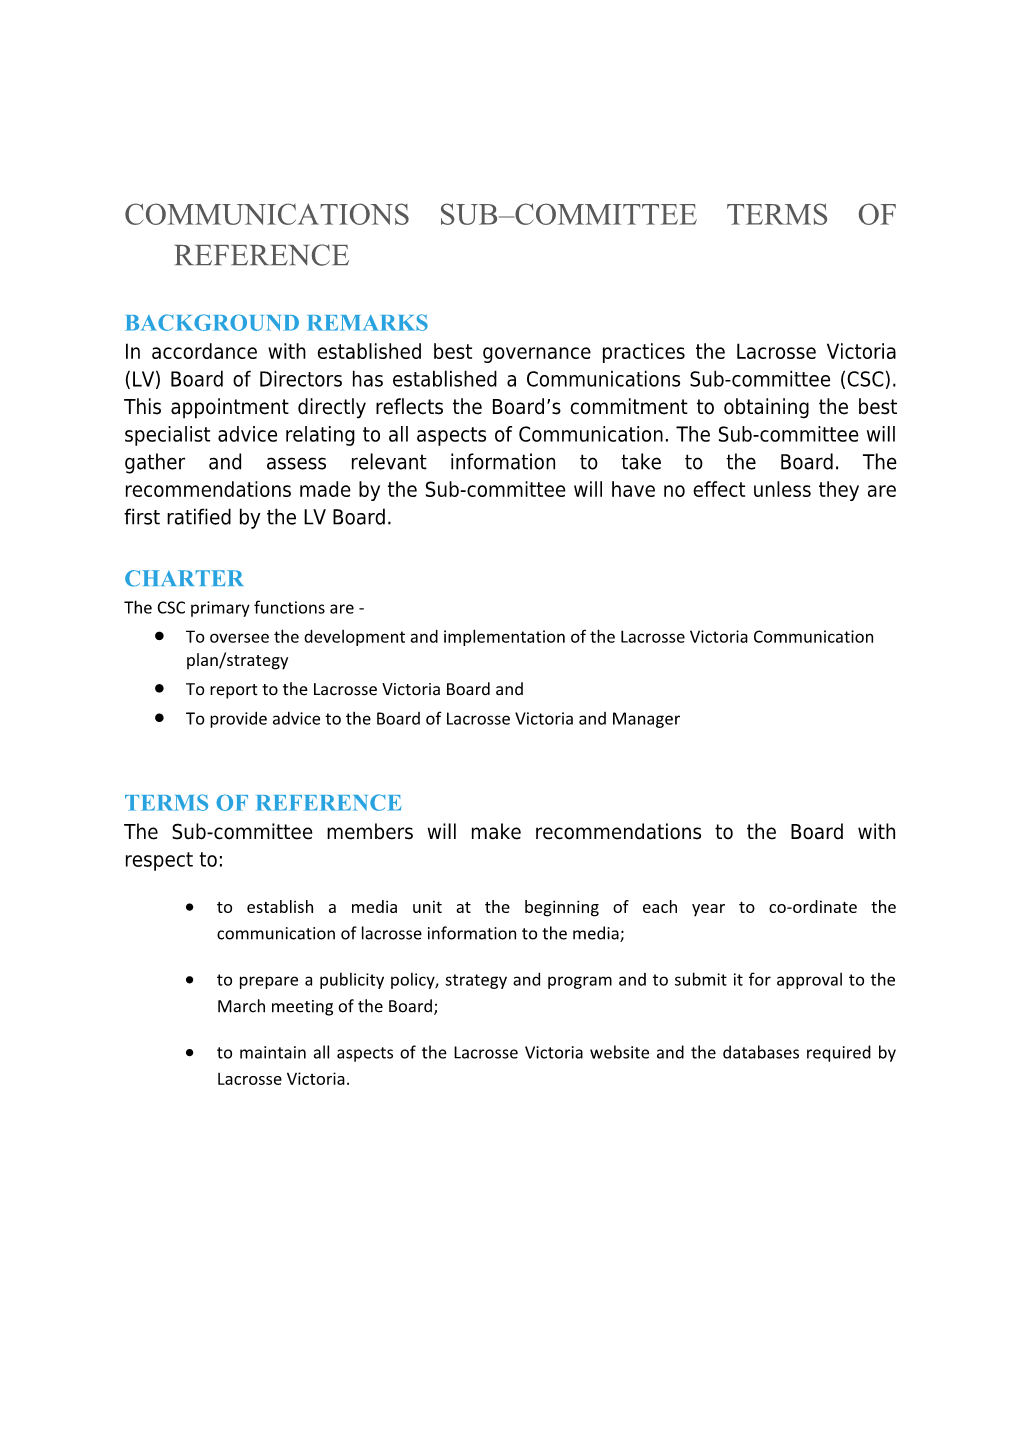 Communications Sub Committee Terms of Reference